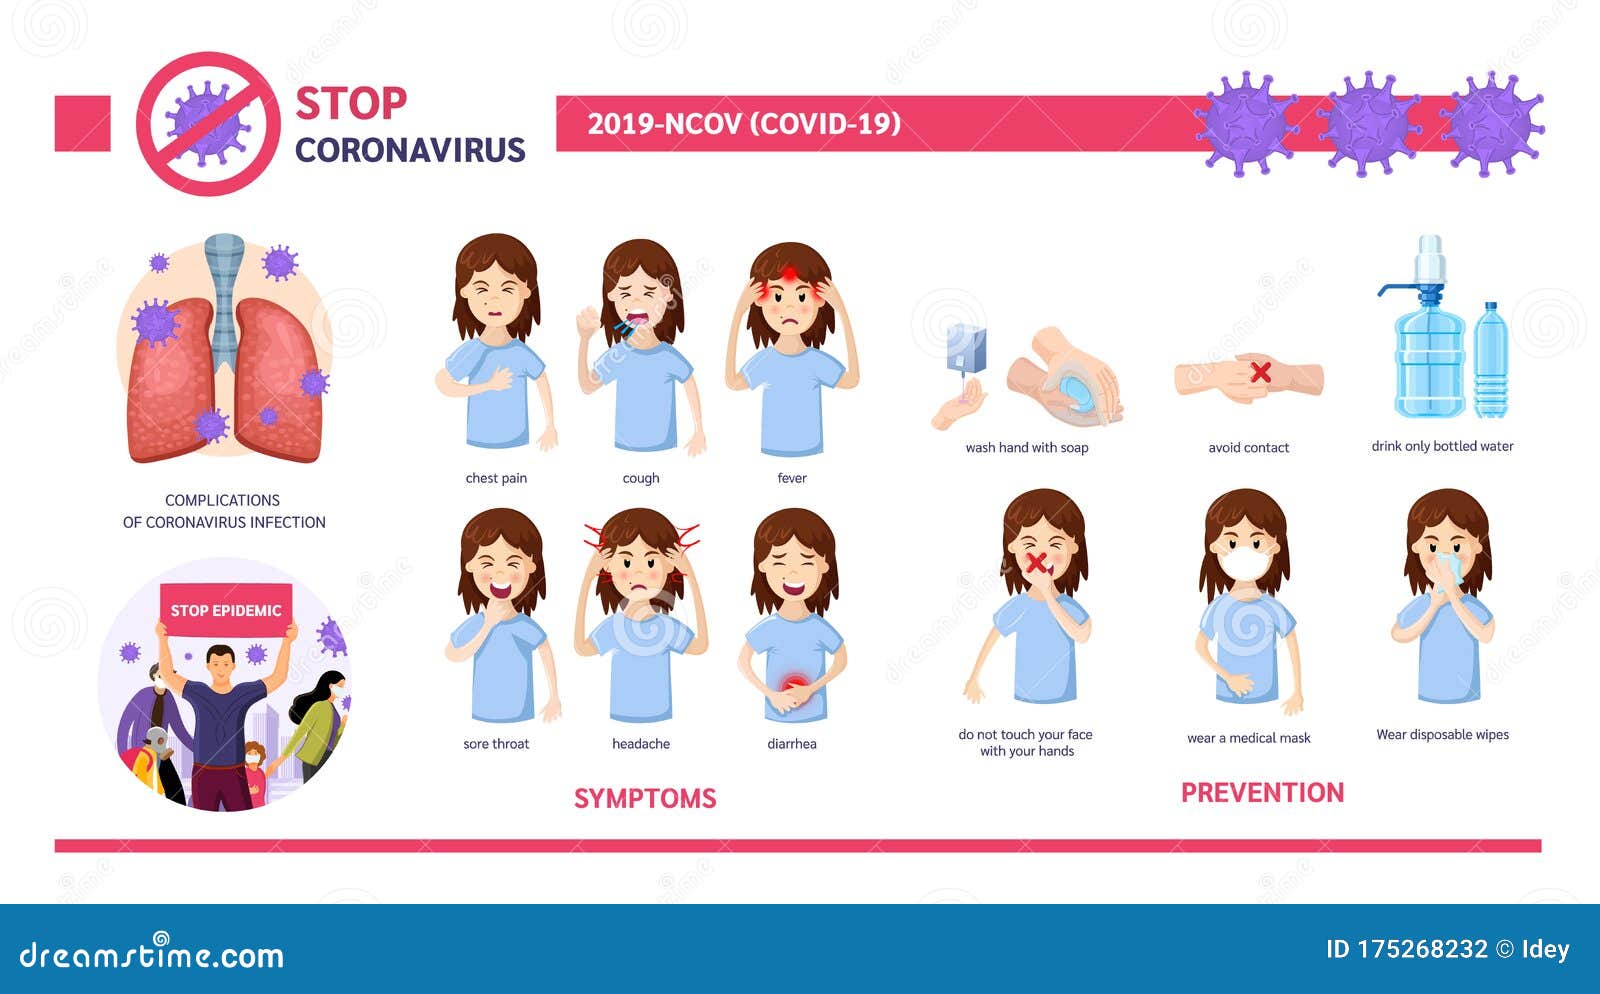 covid-19 virus symptoms, precautions and prevention, infection complications.